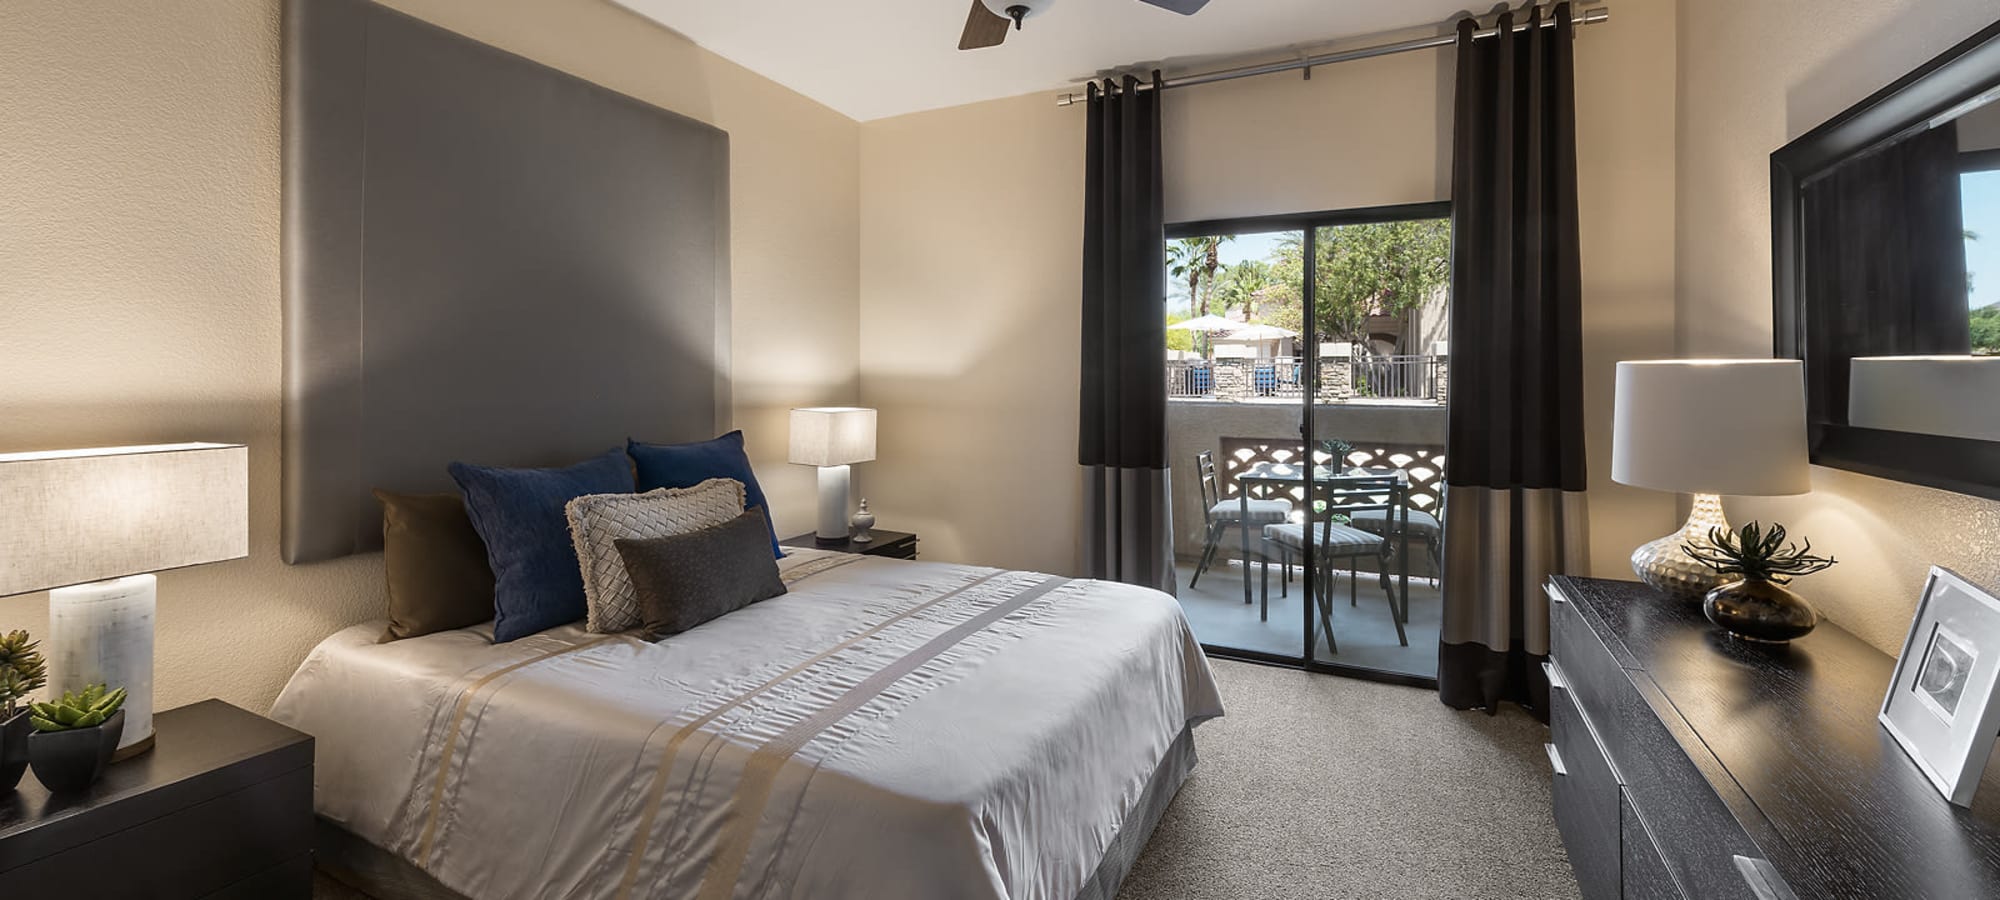 Bedroom with patio access at San Lagos in Glendale, Arizona